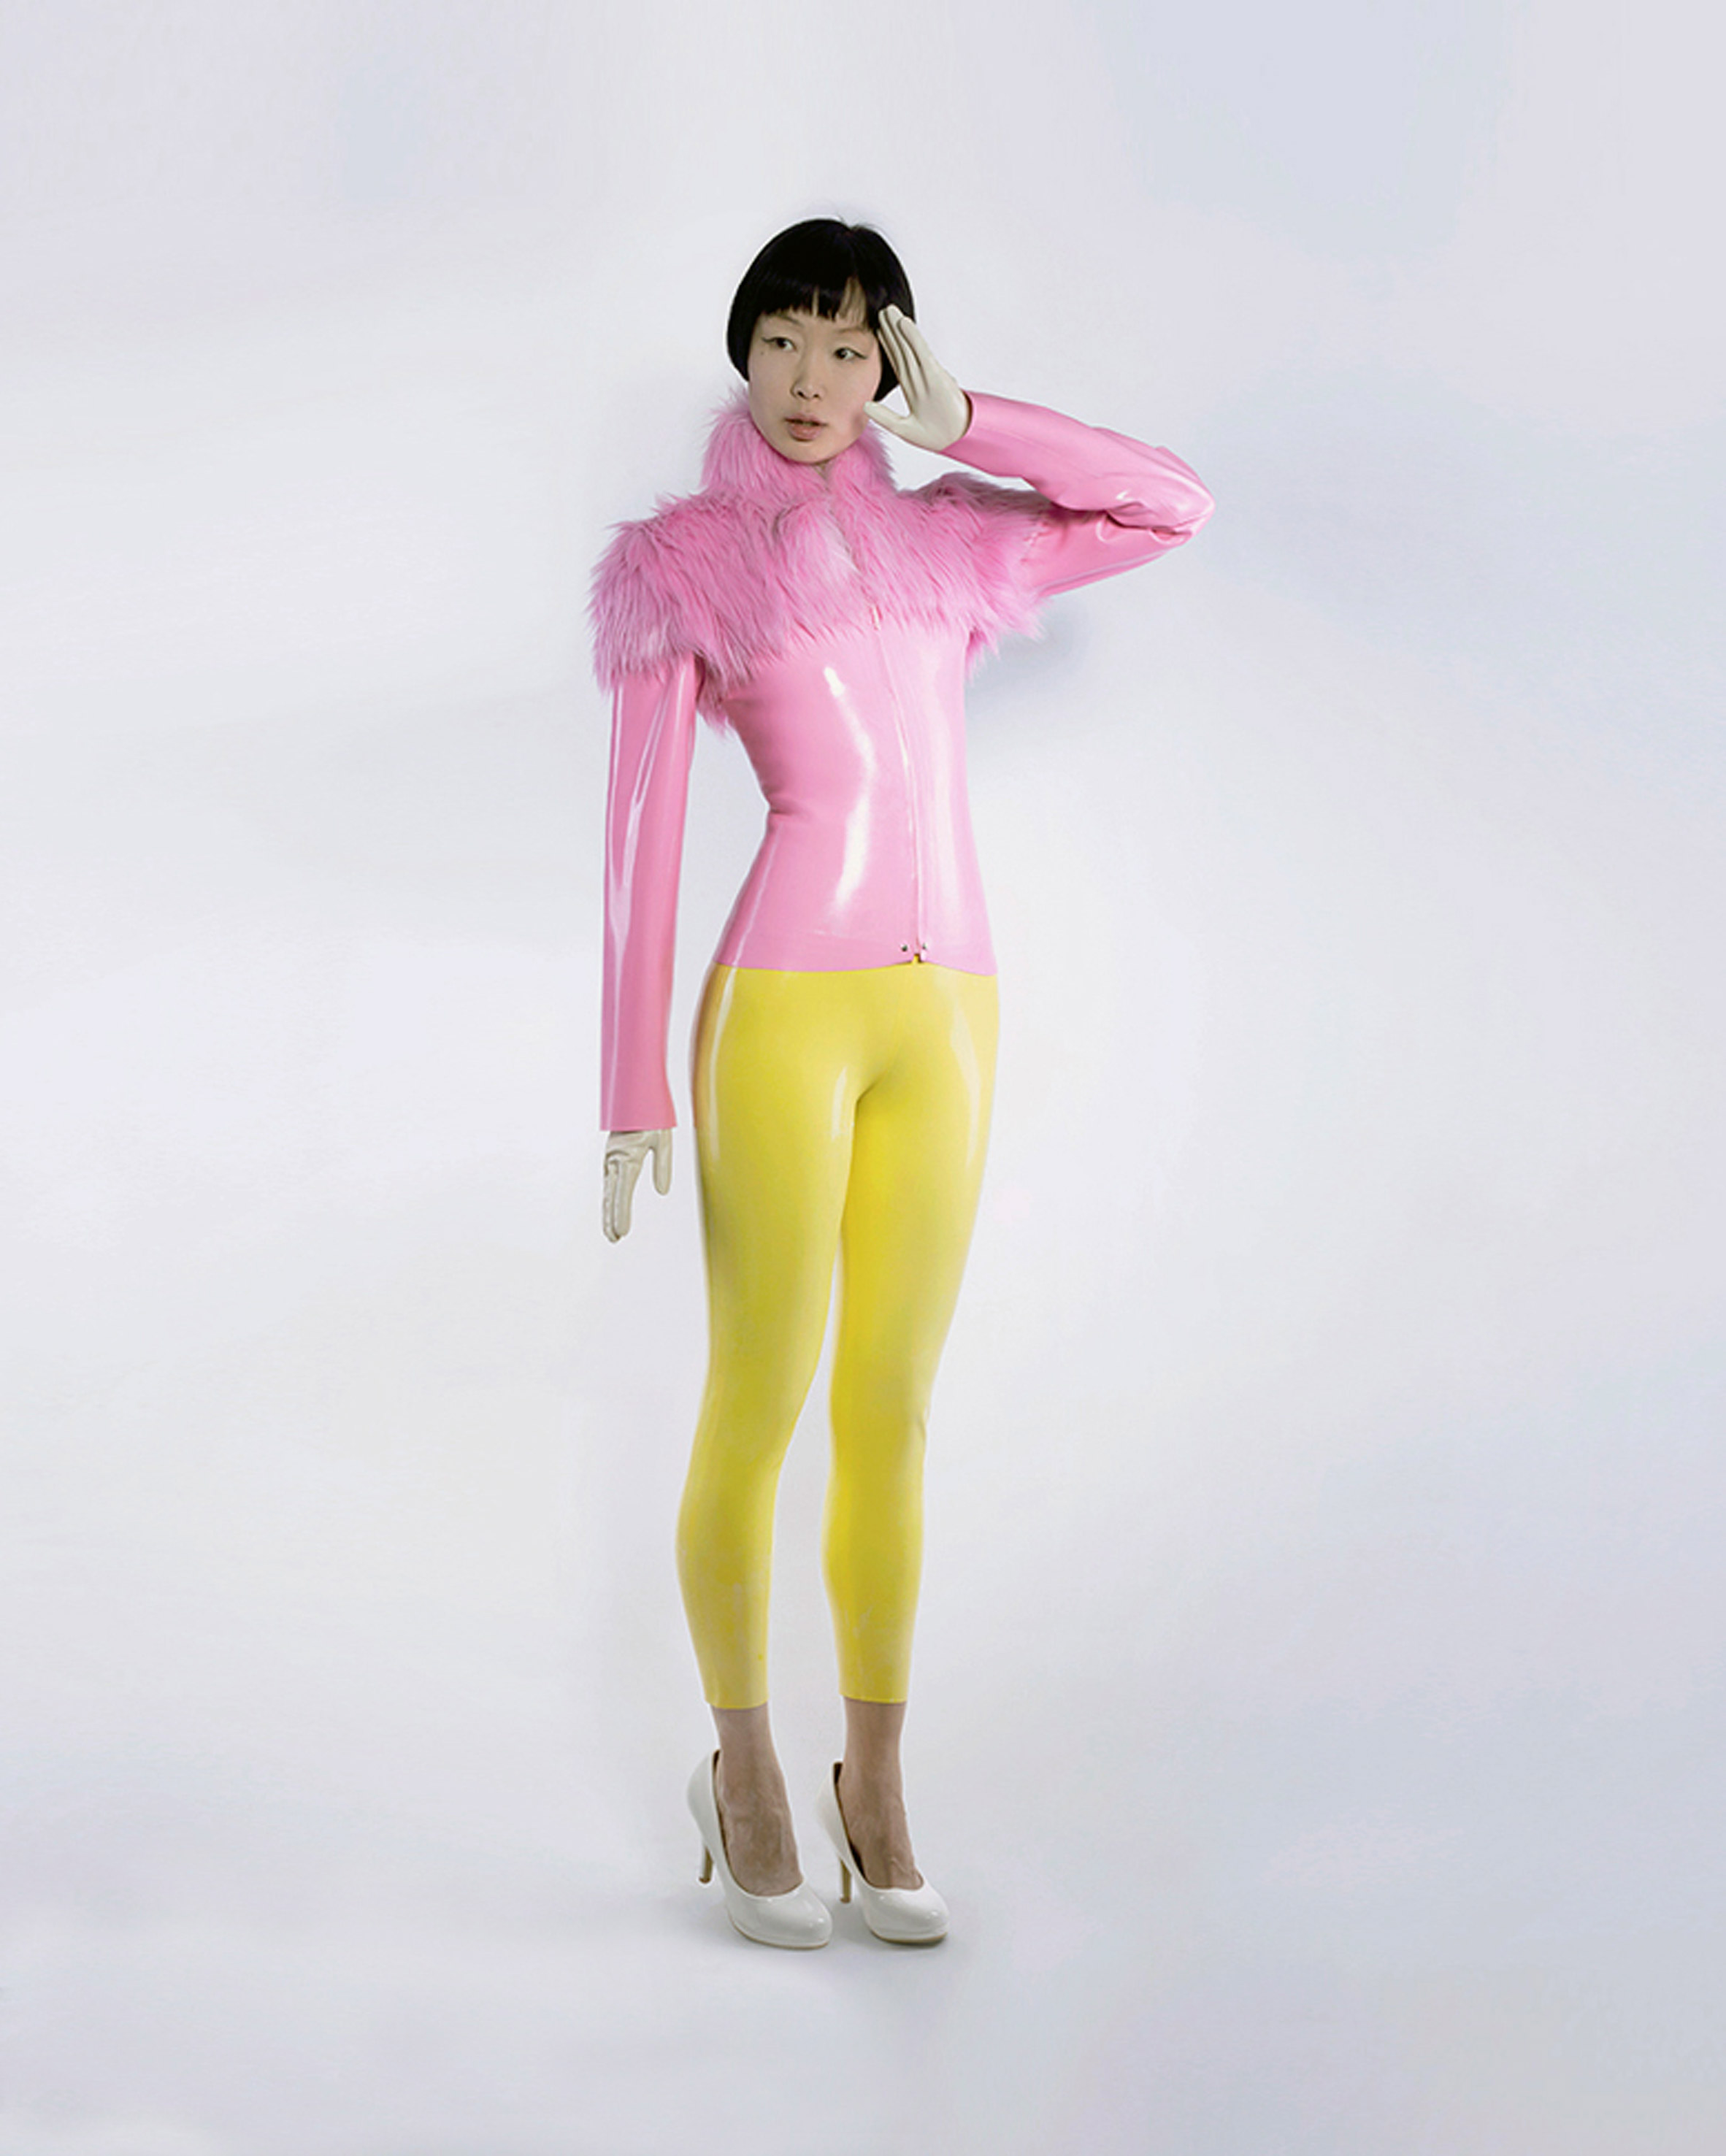 Operio latex clothing collection by Dead Lotus Couture